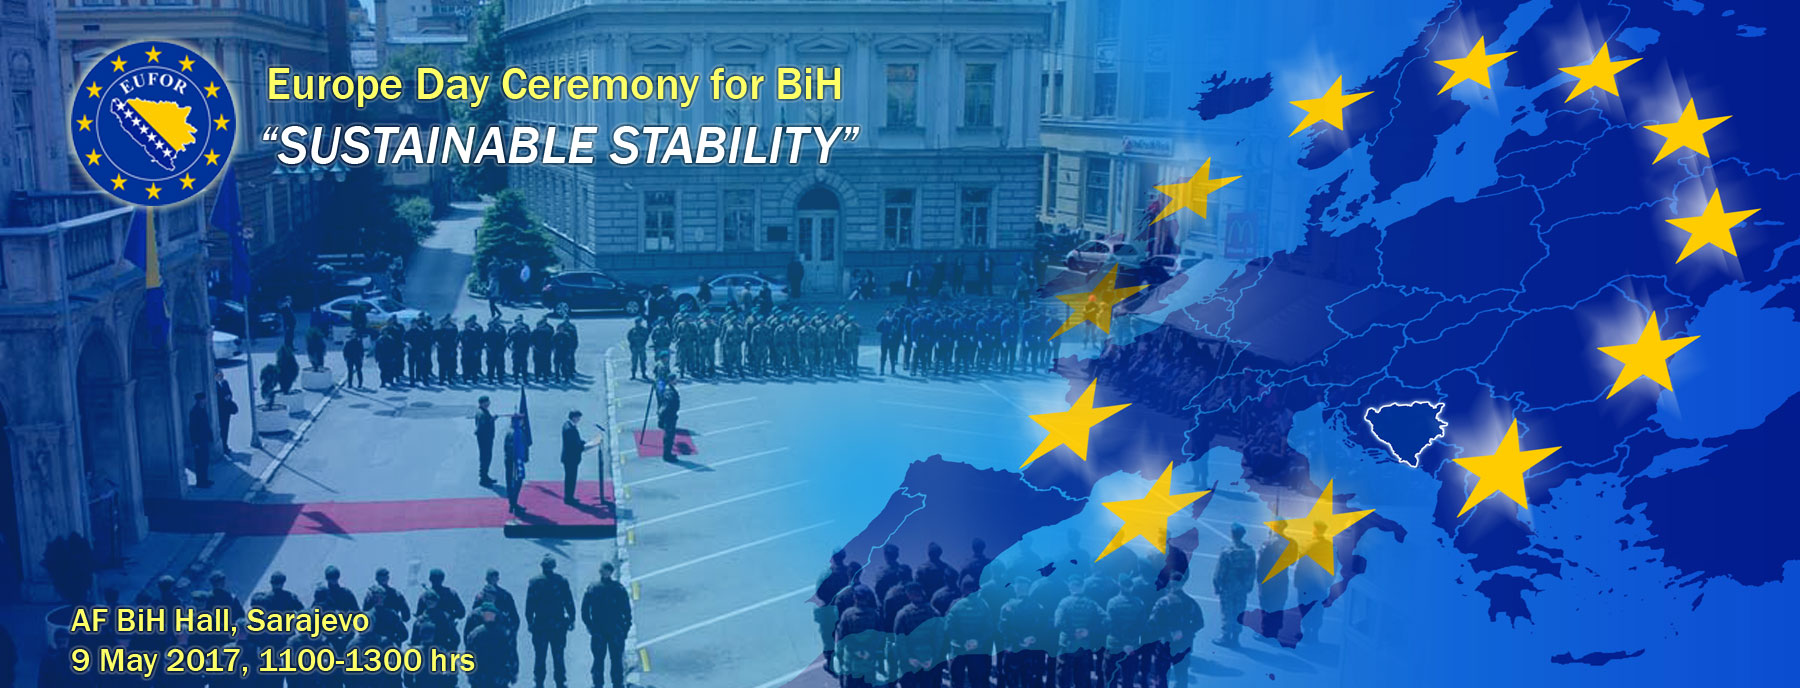 EUFOR Ceremony to mark Europe Day in Bosnia and Herzegovina